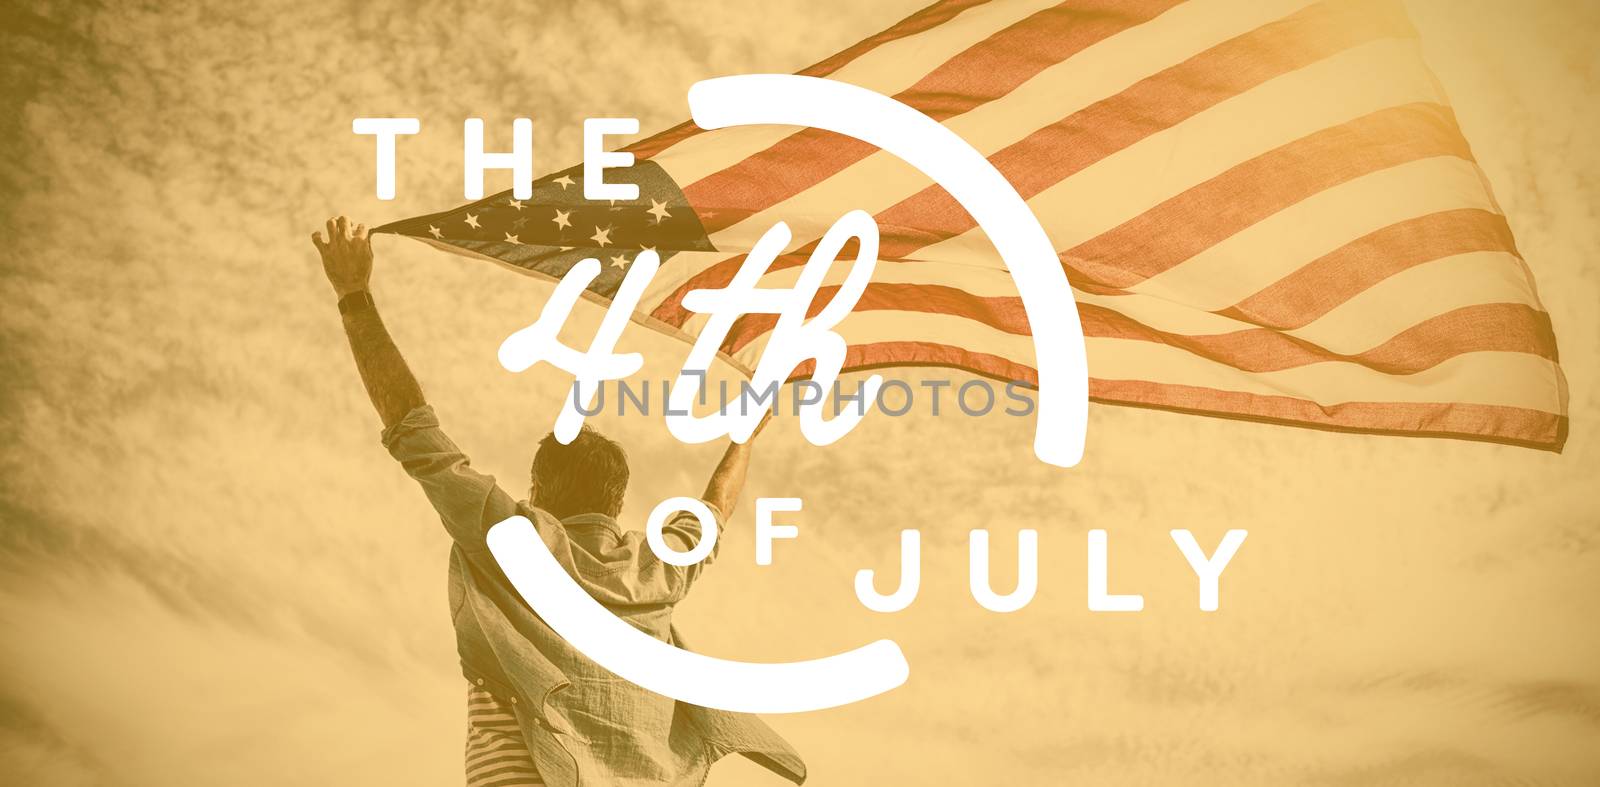 Colorful happy 4th of july text against white background against low angle view of man holding american flag against cloudy sky